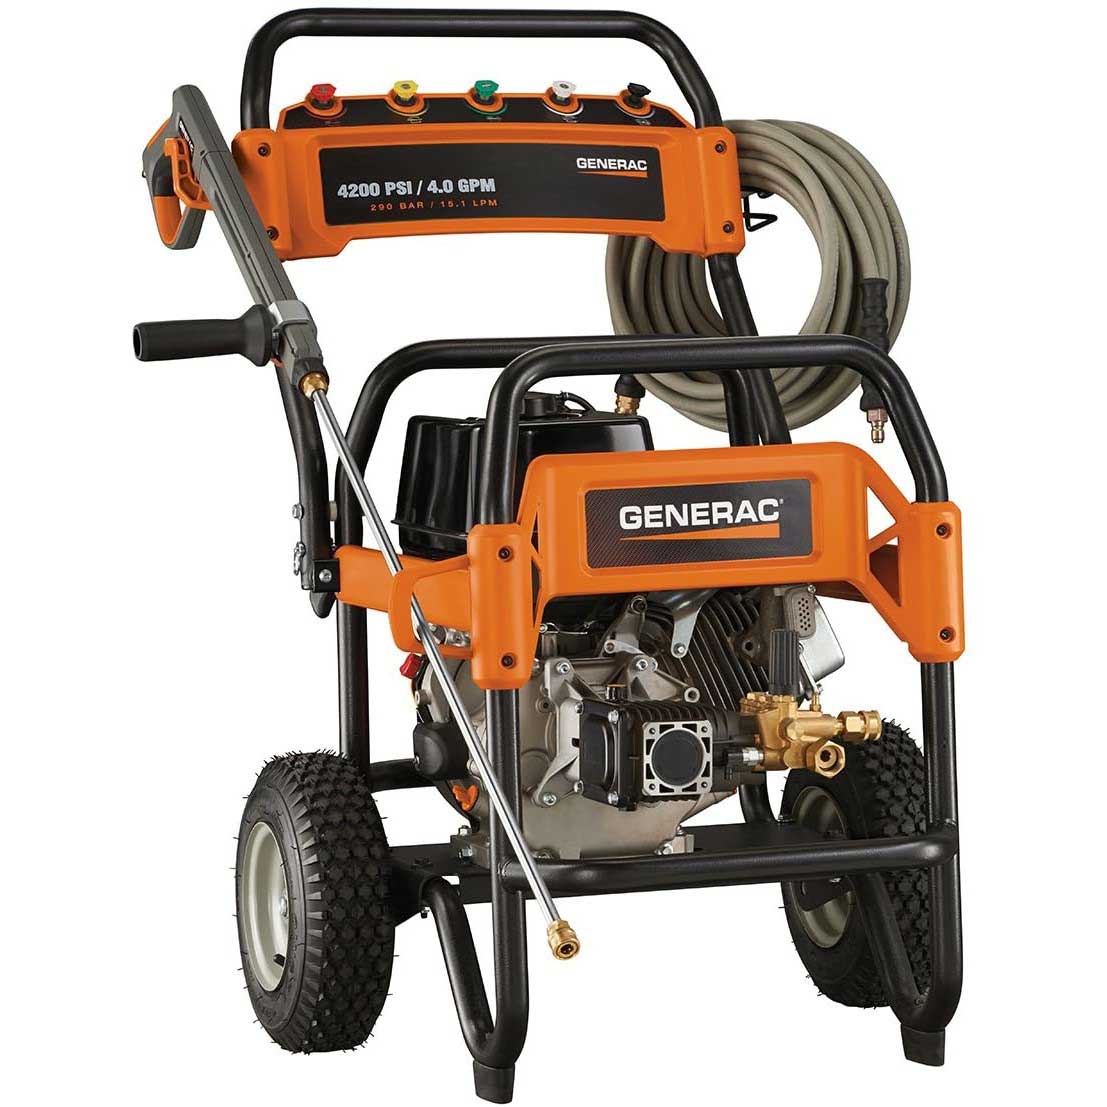 Generac 4200PSI Commercial Pressure Washer